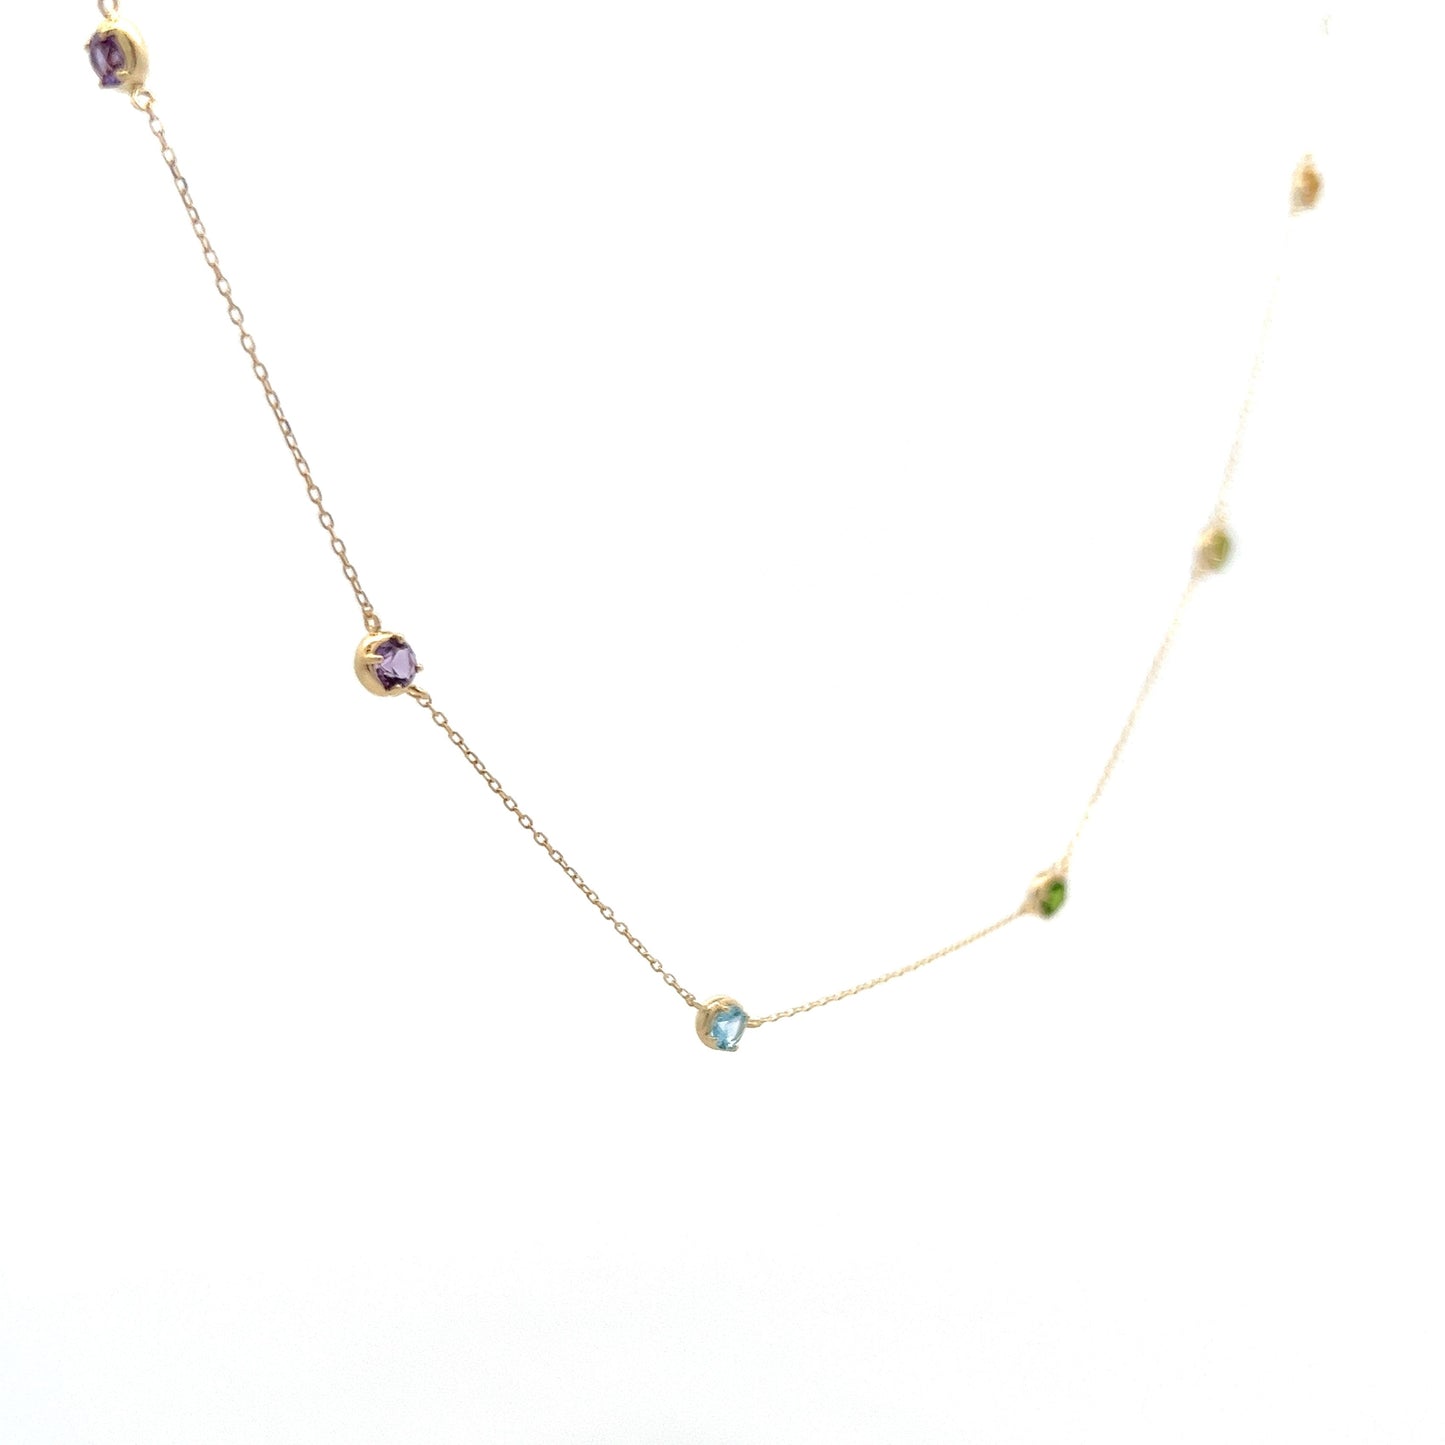 1.21 Multi-Gemstone Necklace in 14k Yellow Gold